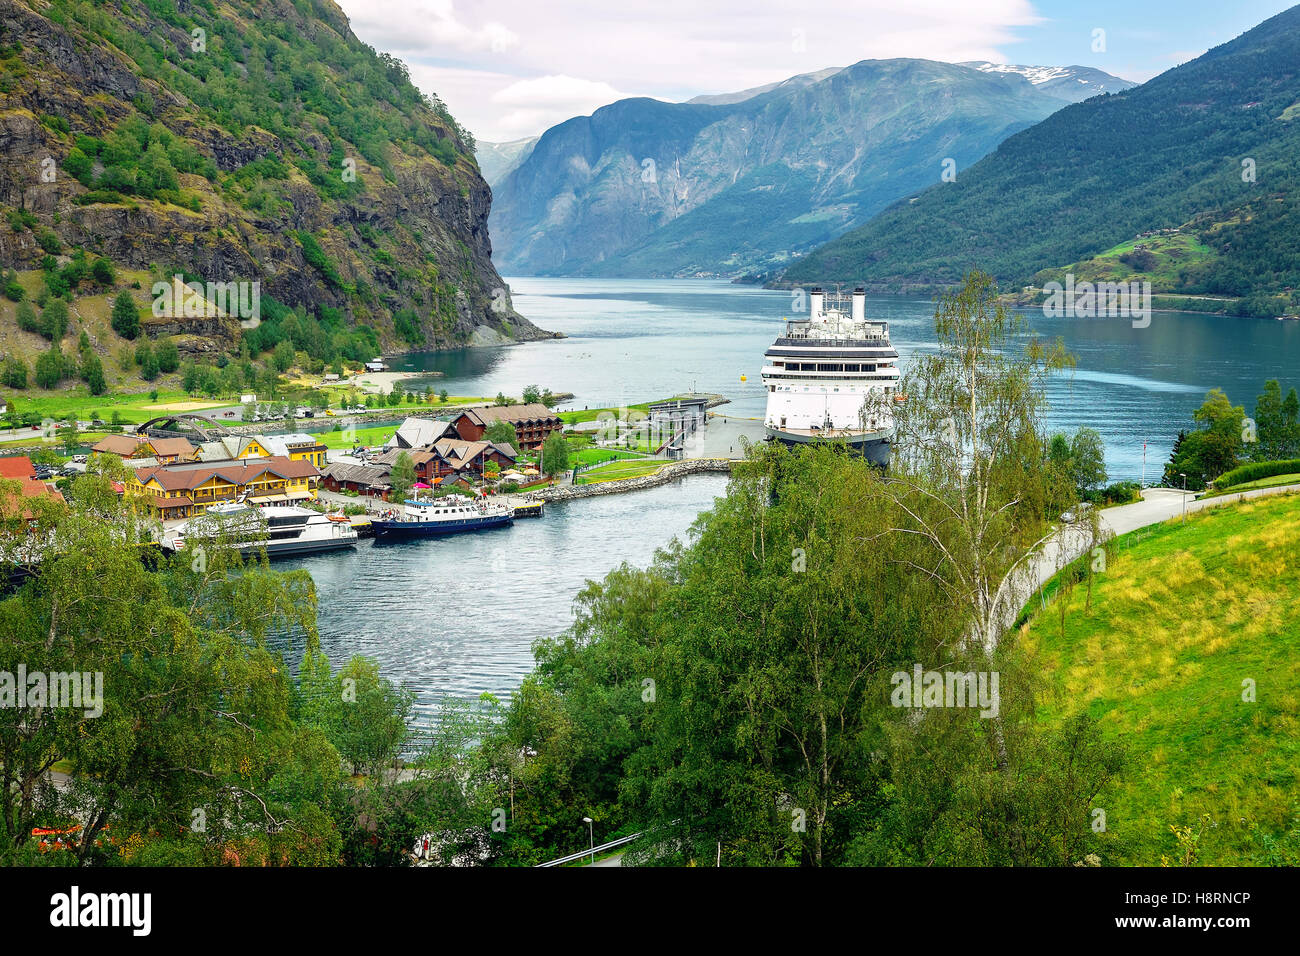 Port Flam with cruise ship. Aurlandsfjord, Norway Stock Photo